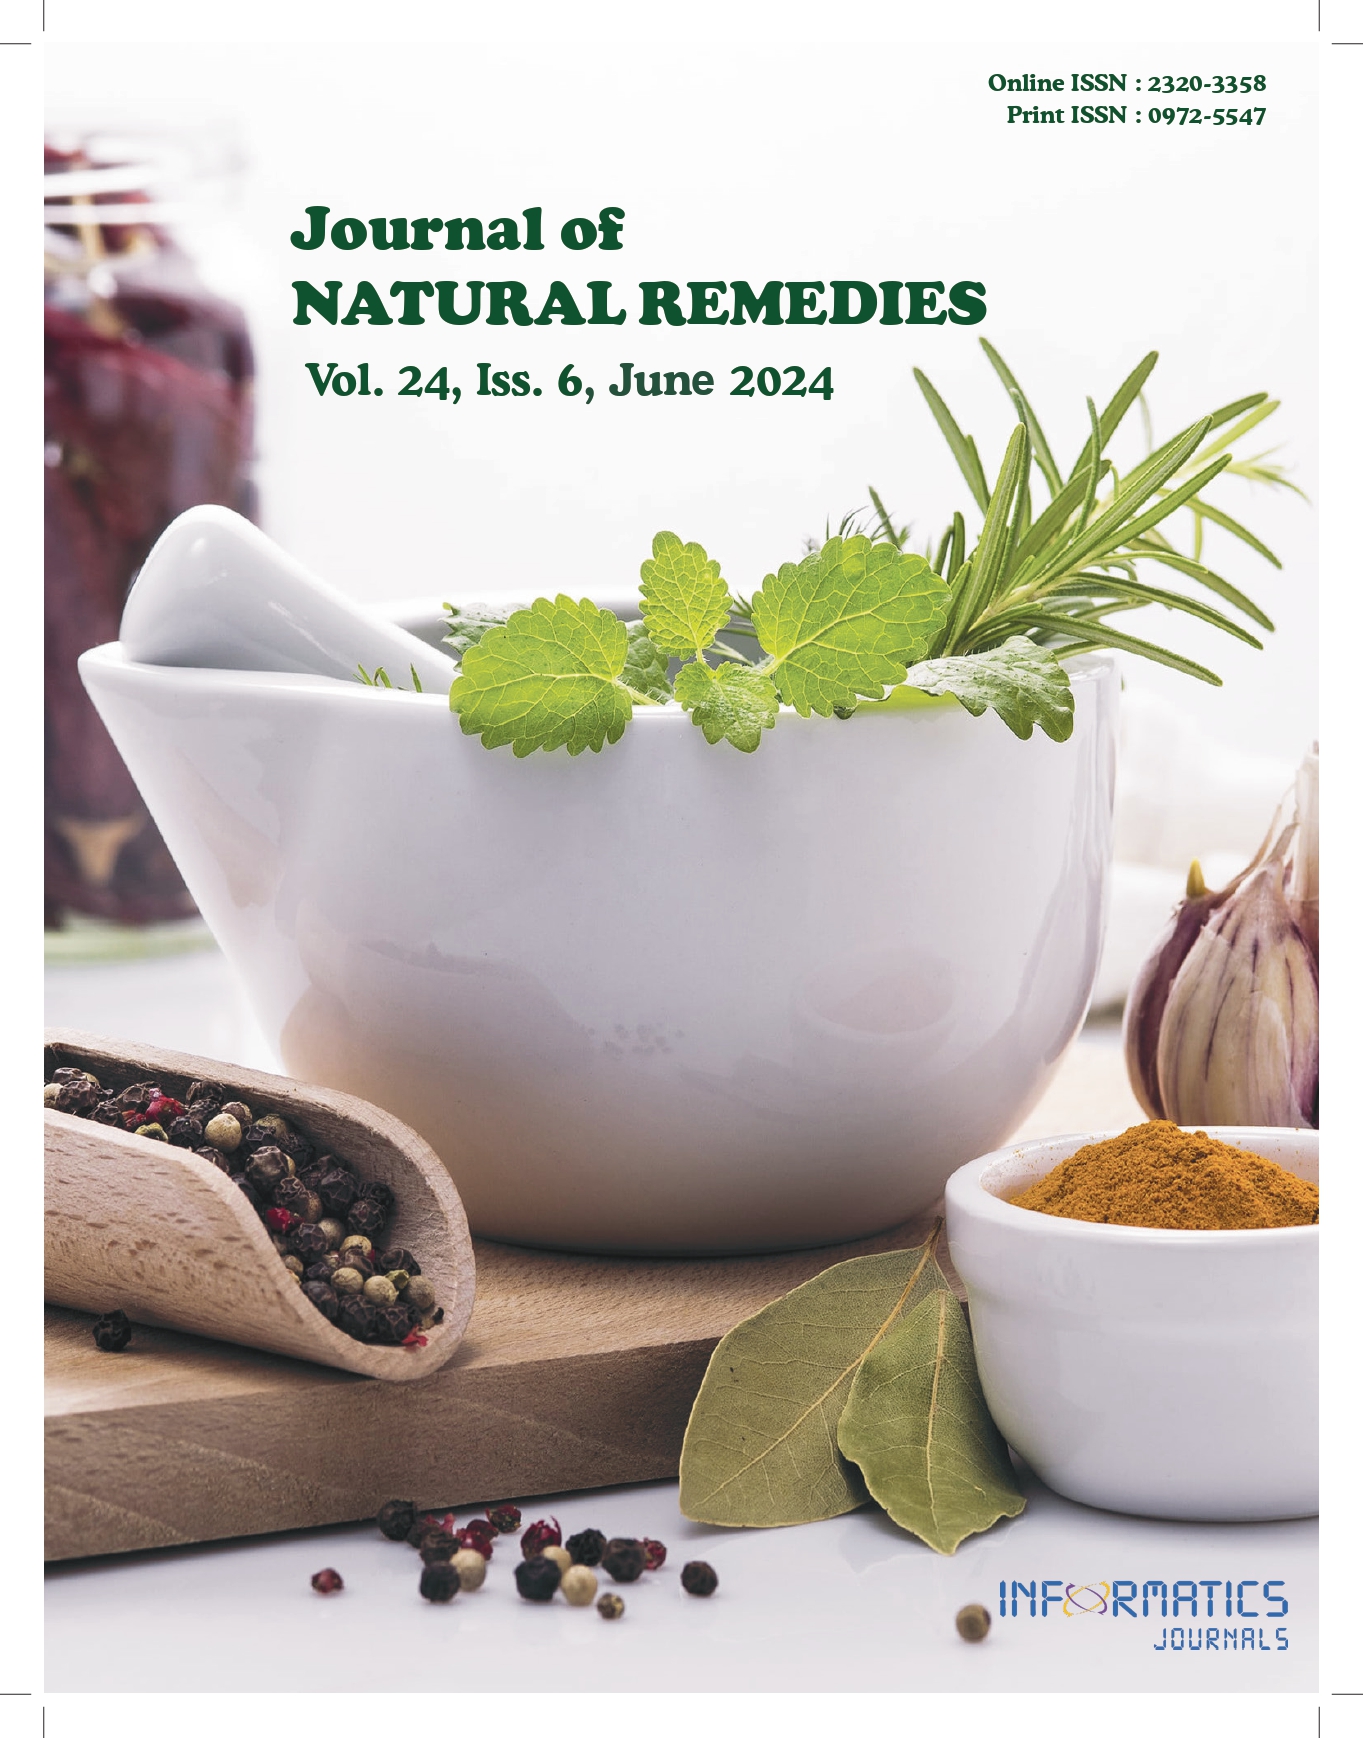 					View Volume 24, Issue 6, June 2024
				